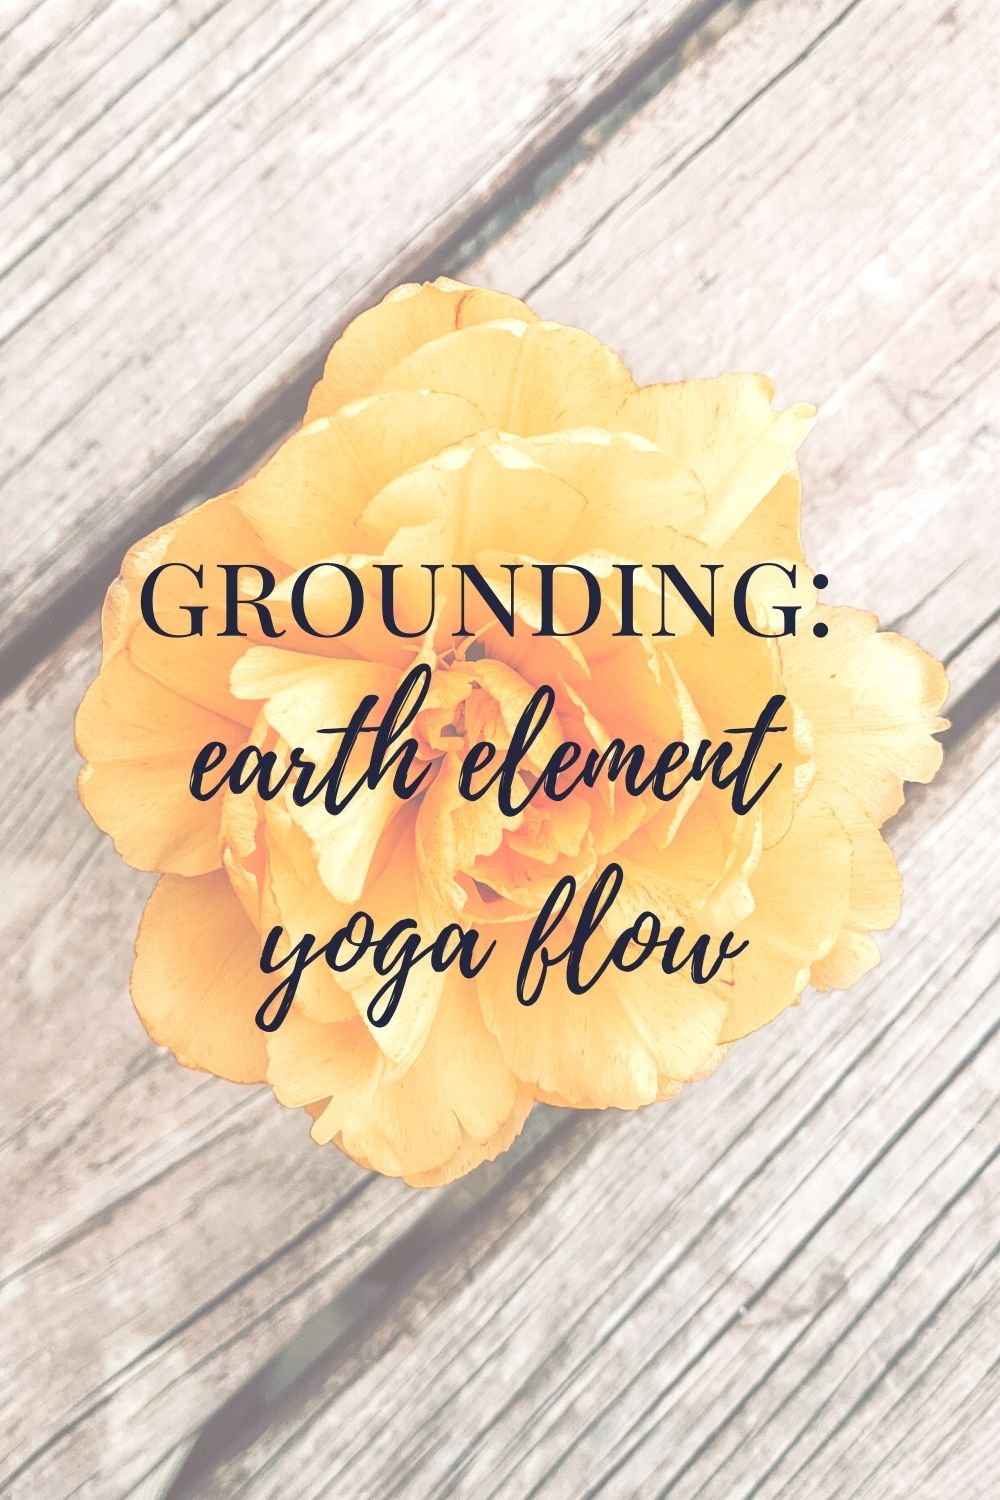 Come Get Grounded Through a Quick Yoga Flow